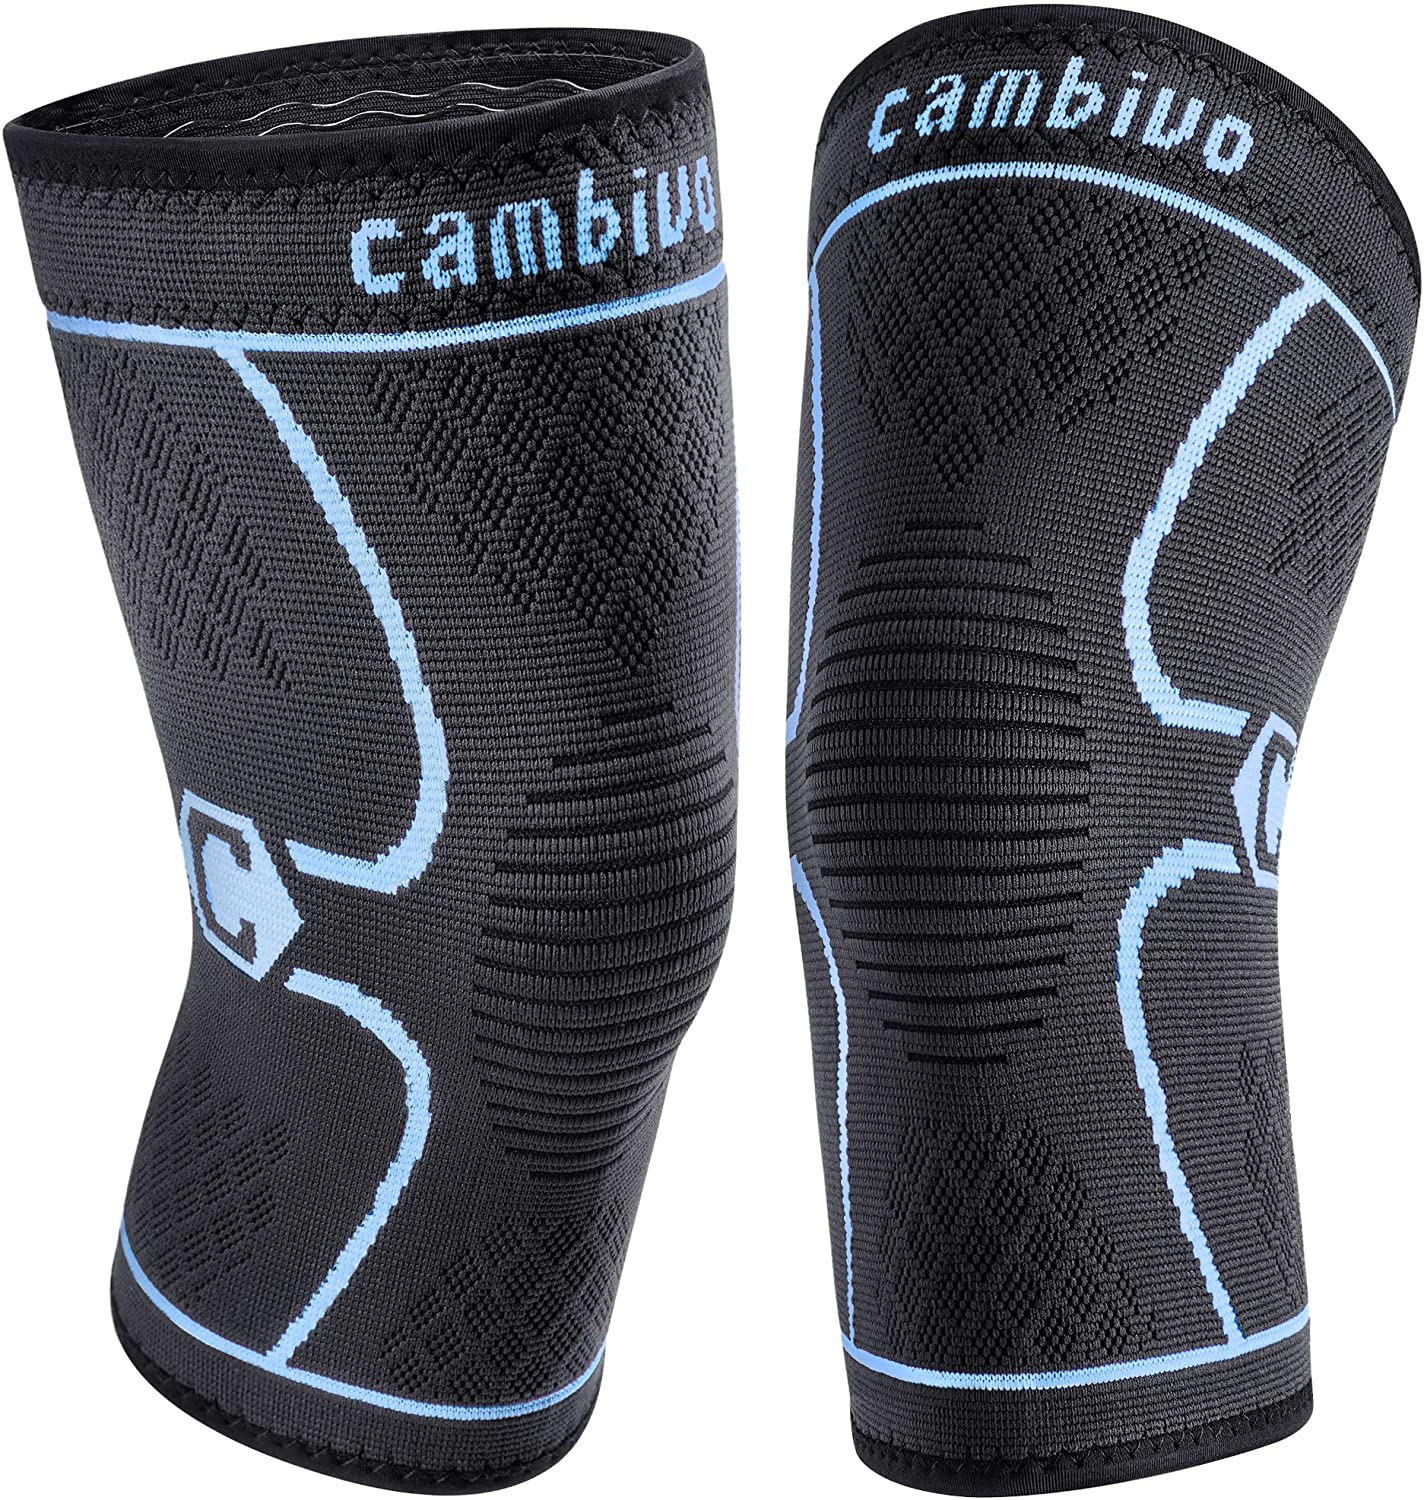 CAMBIVO Knee Compression Sleeves